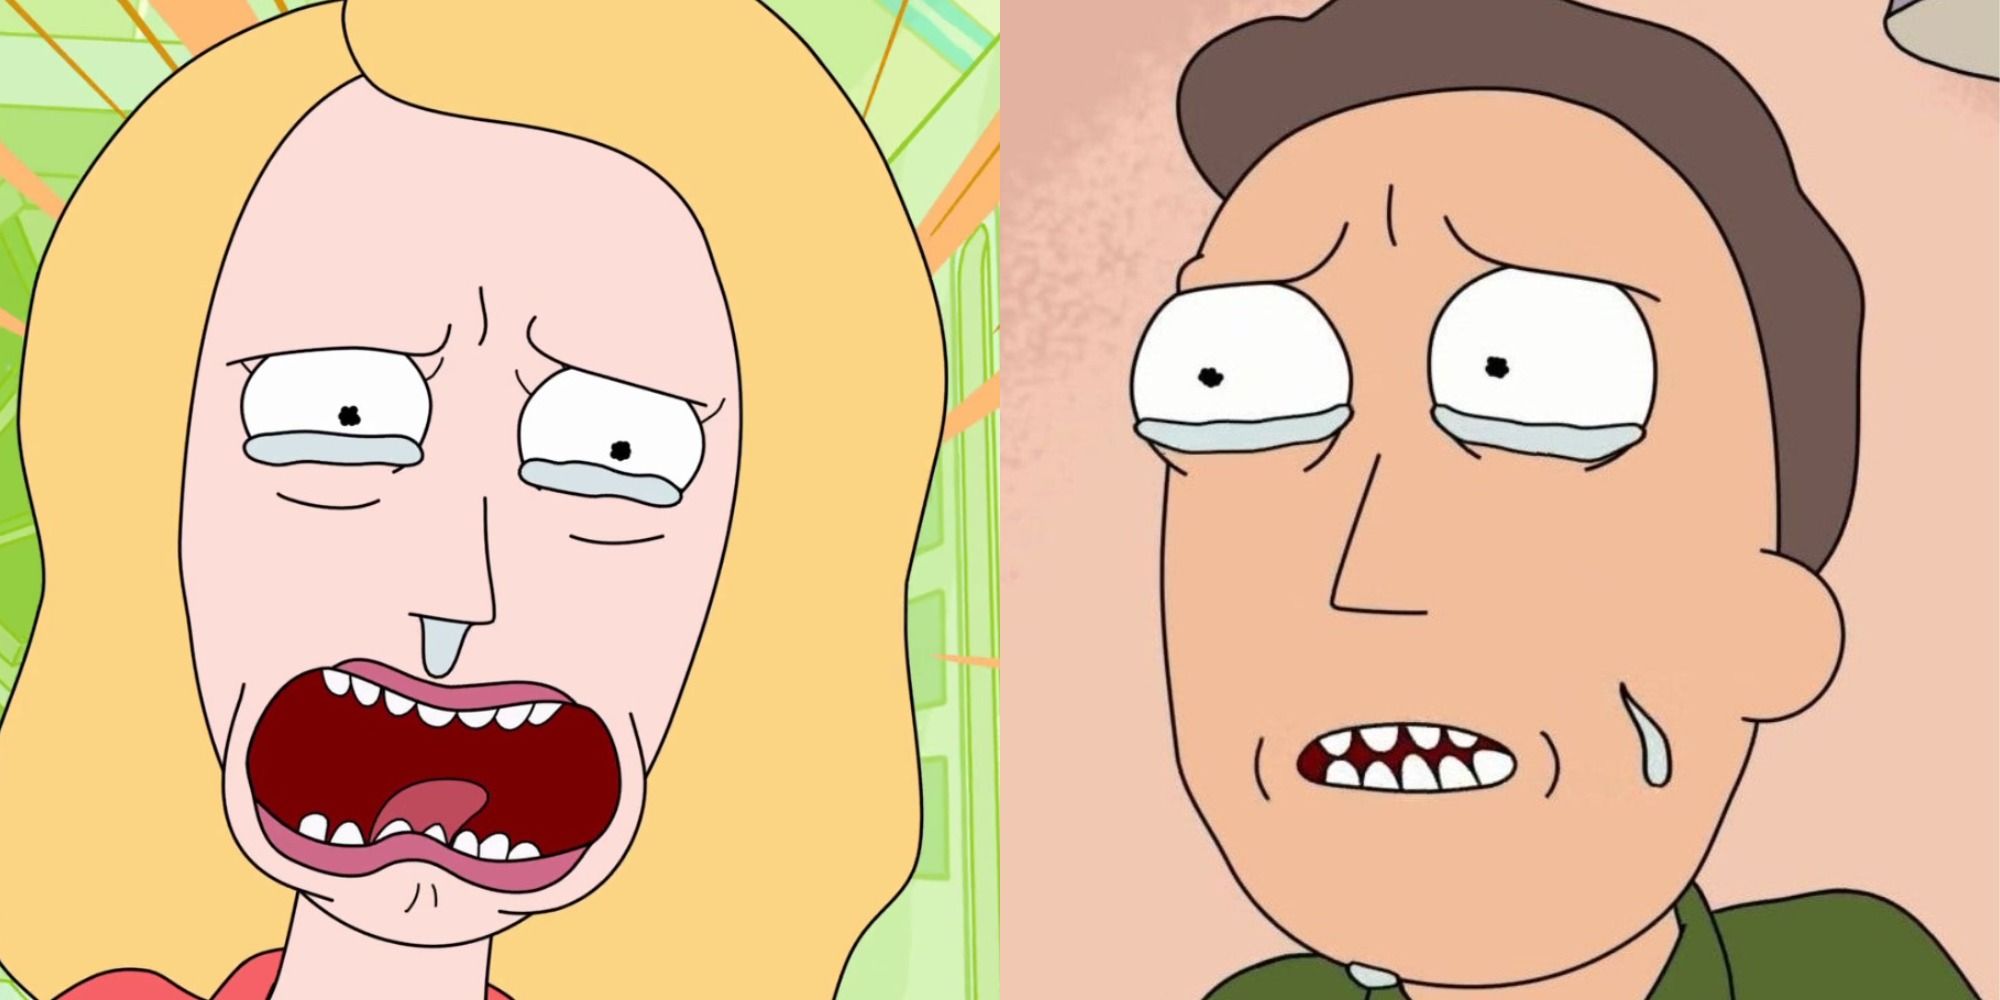 Beth and Jerry Smith from Rick and Morty